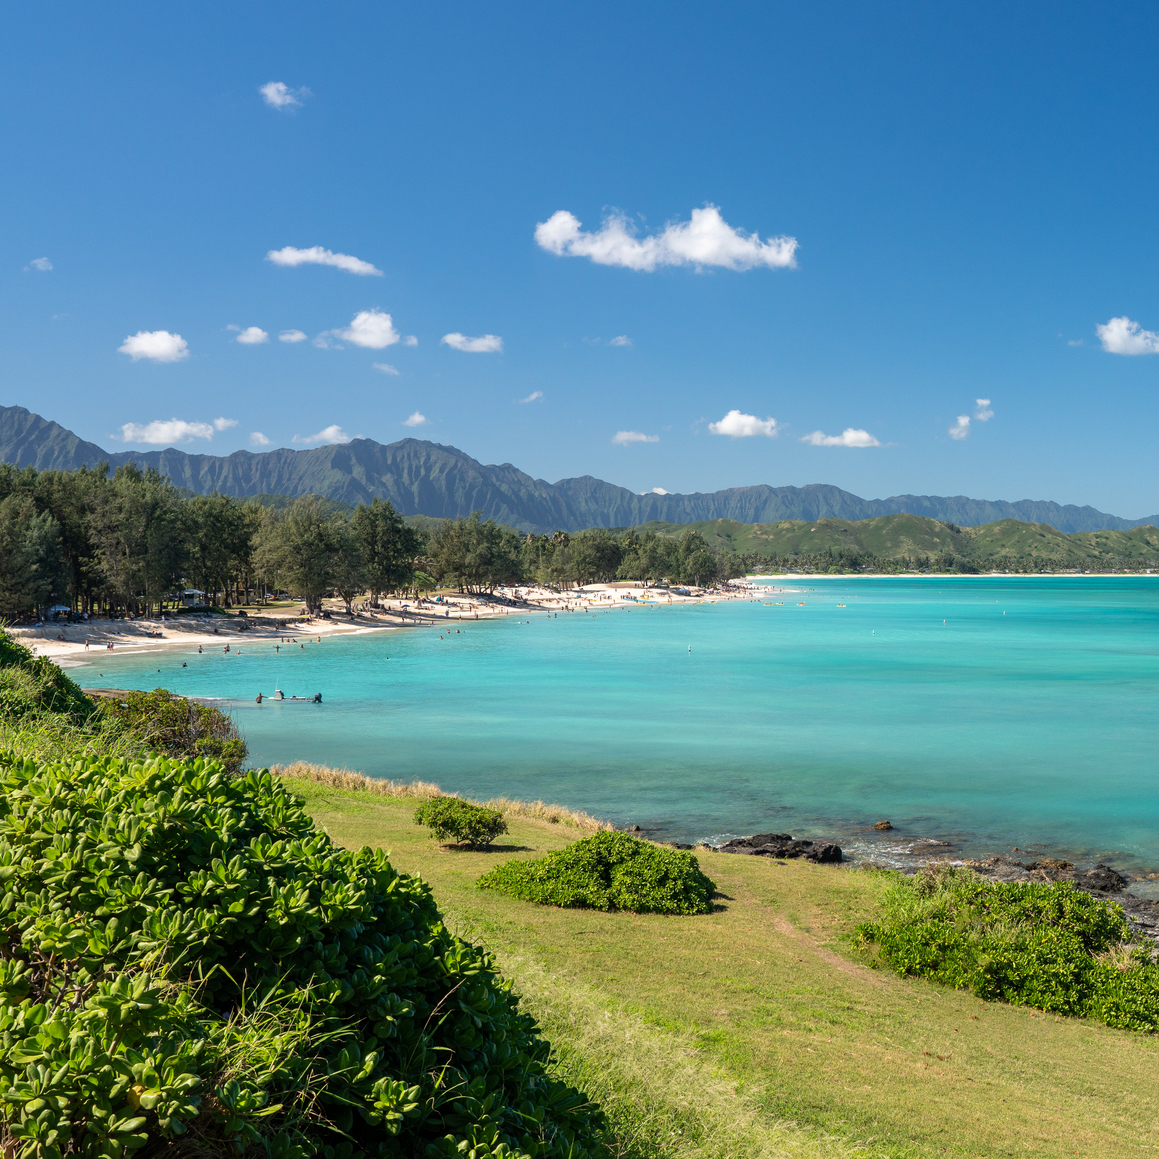 North Shore on Oahu - A Lush Coast Just 30 Minutes North of